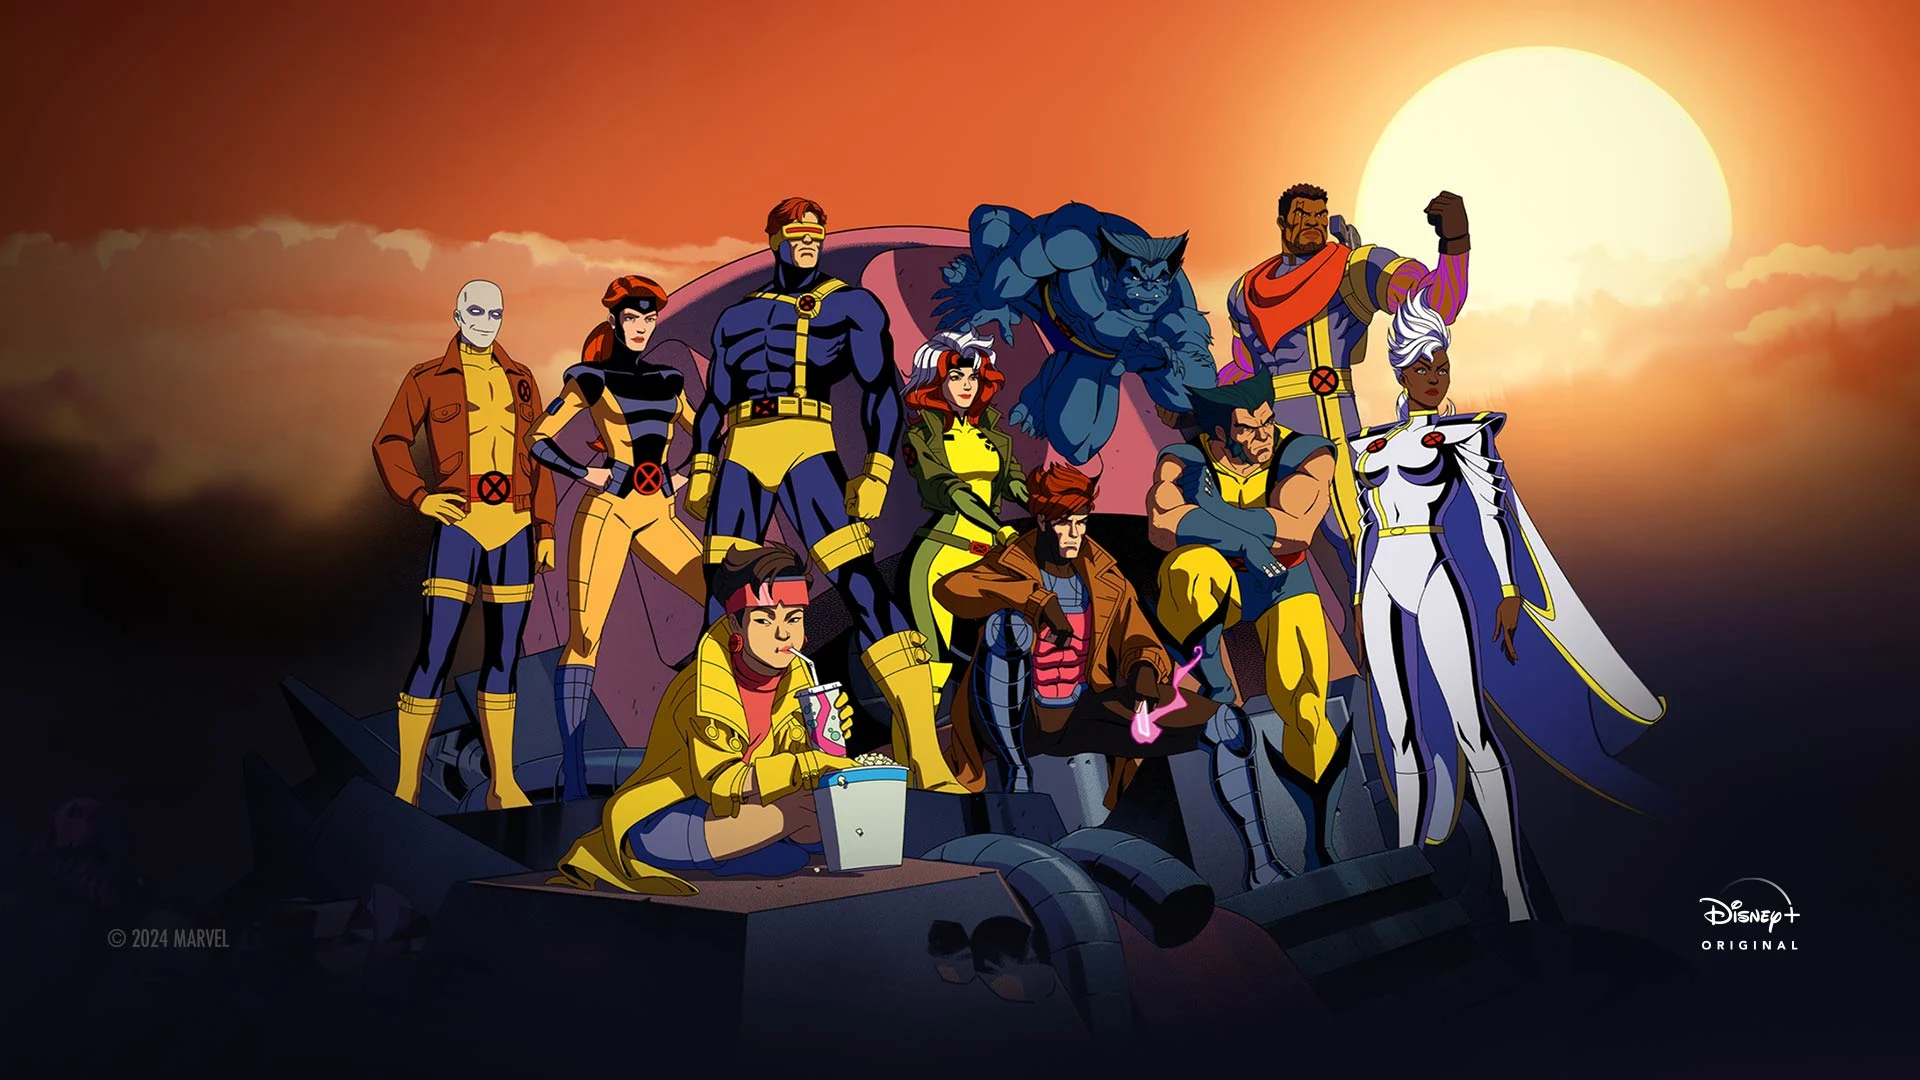 X Men 97 Episode 7: Release Date, Expected Plot, where to watch?